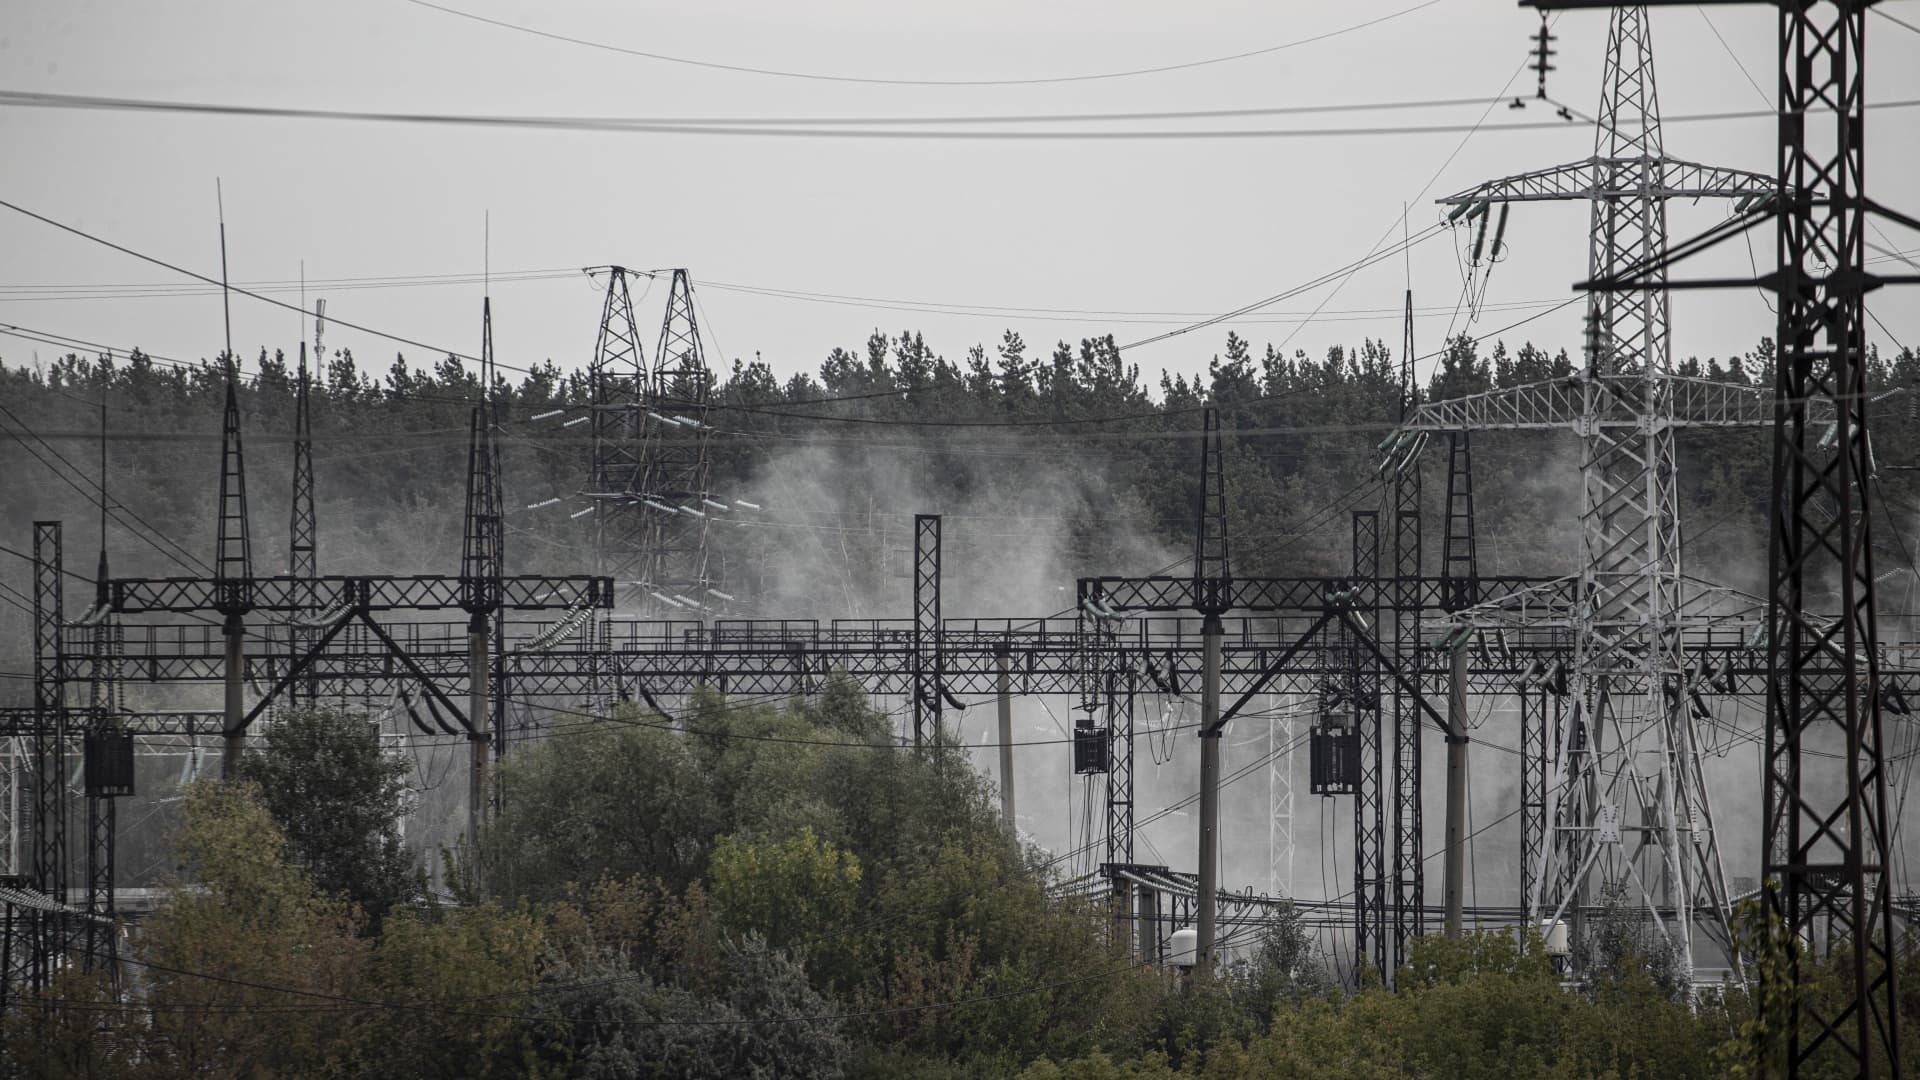 Smoke rises over Kharkiv's western outskirts as firefighters put out the fire after a Russian rocket attack hit an electric power station in Kharkiv, Kharkiv Oblast, Ukraine, on Sept. 12, 2022.